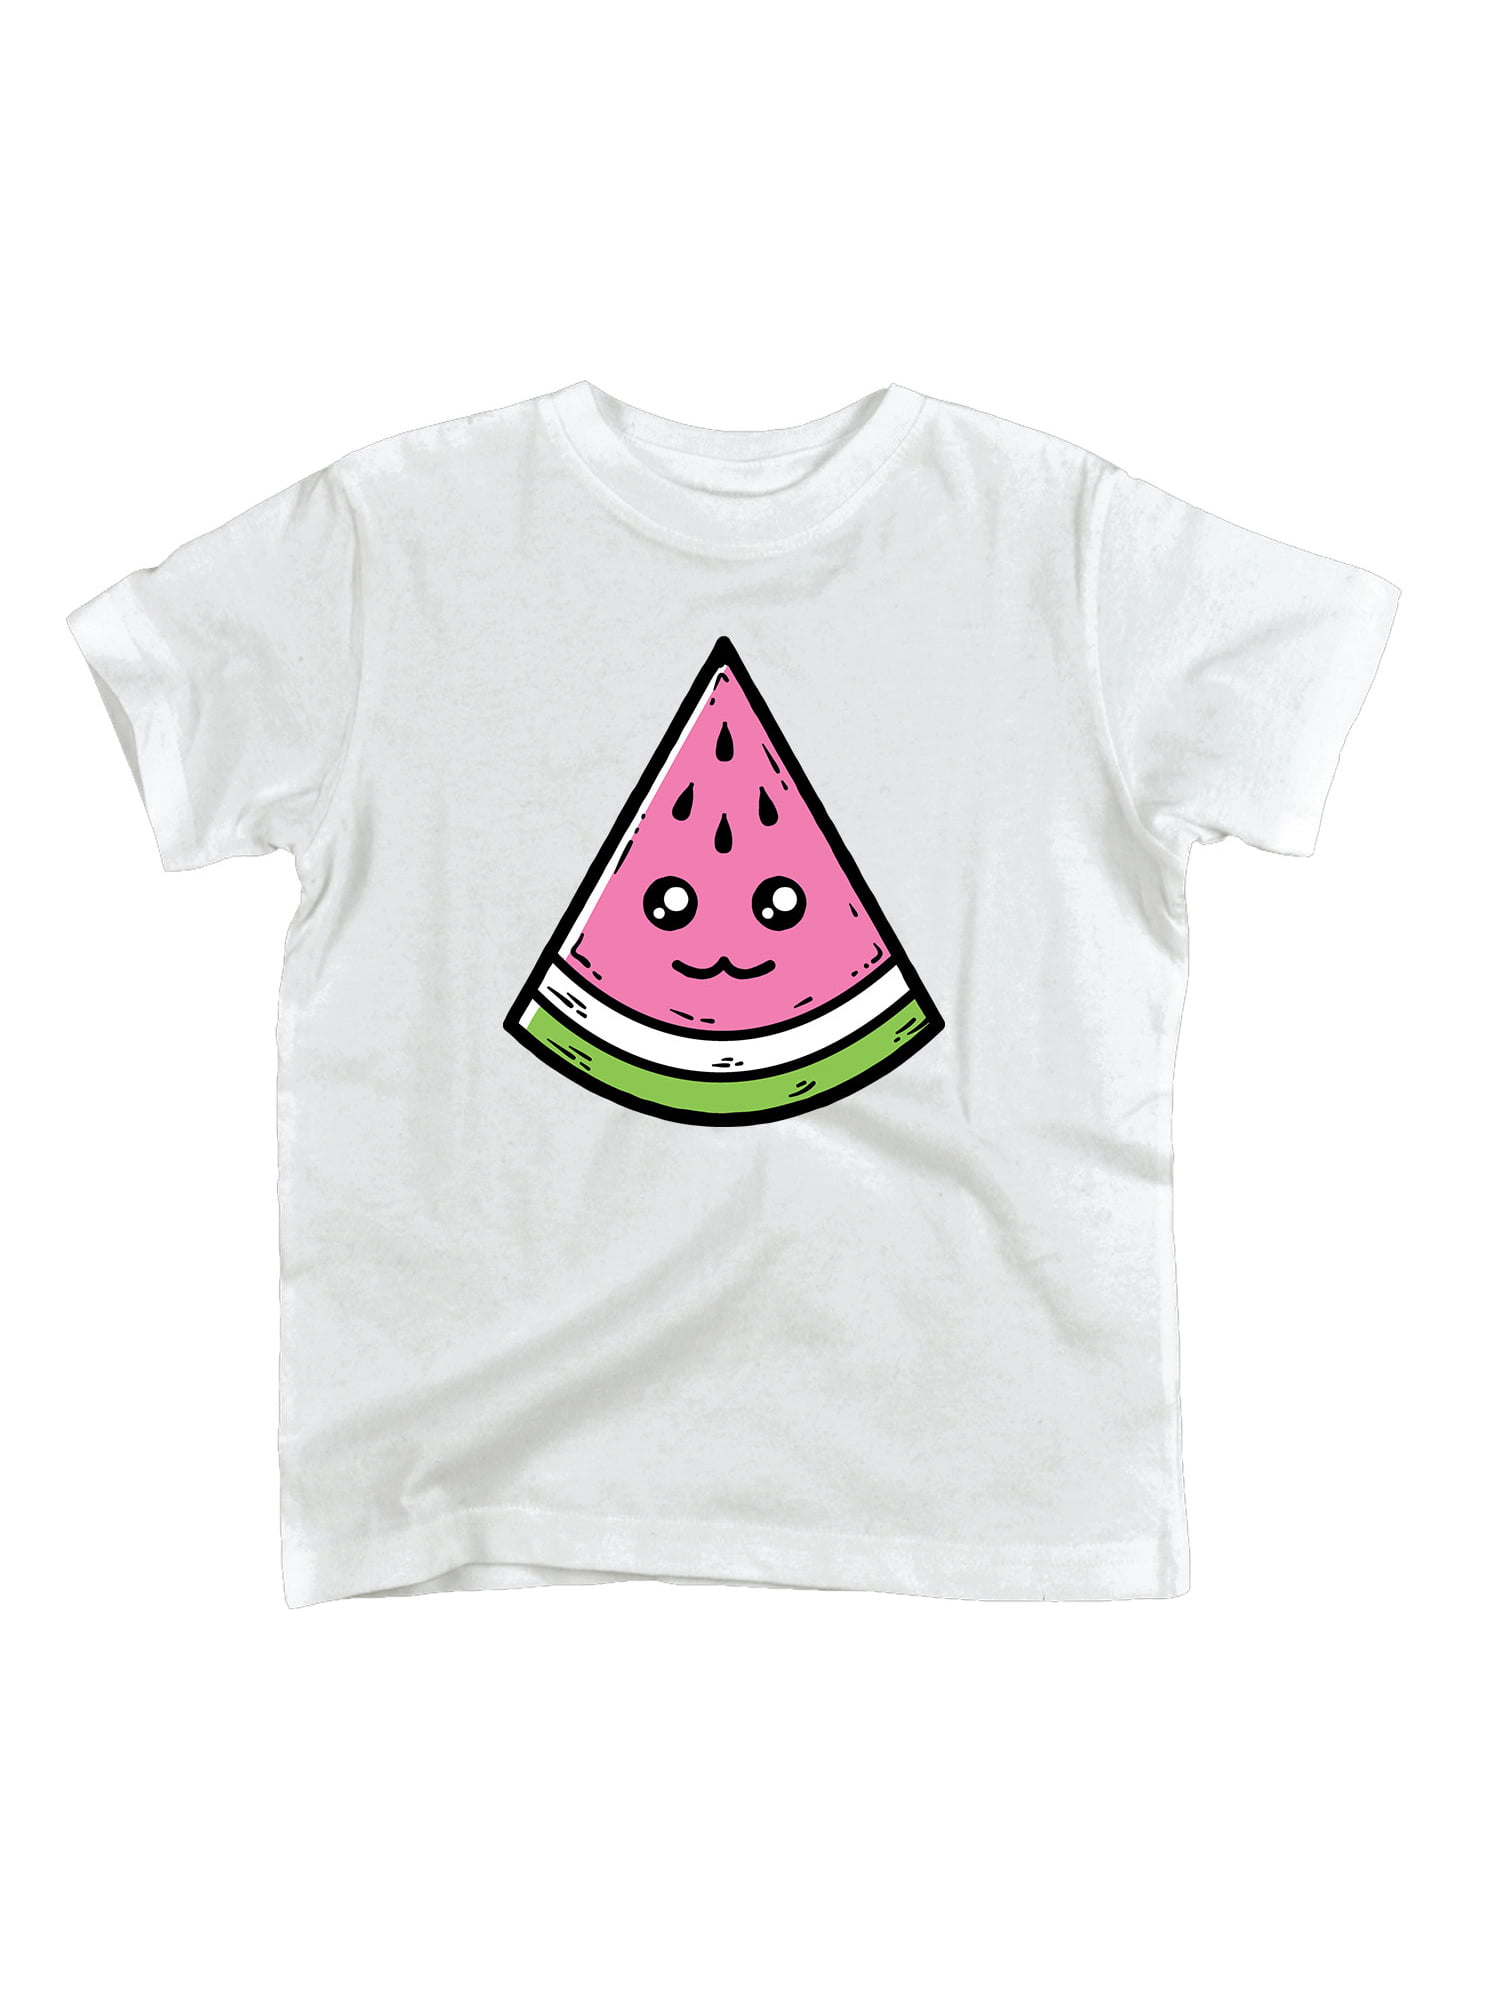 Details about   Happy Watermelon Toddler Infant Kids Child Short Sleeve Tee T-Shirt 